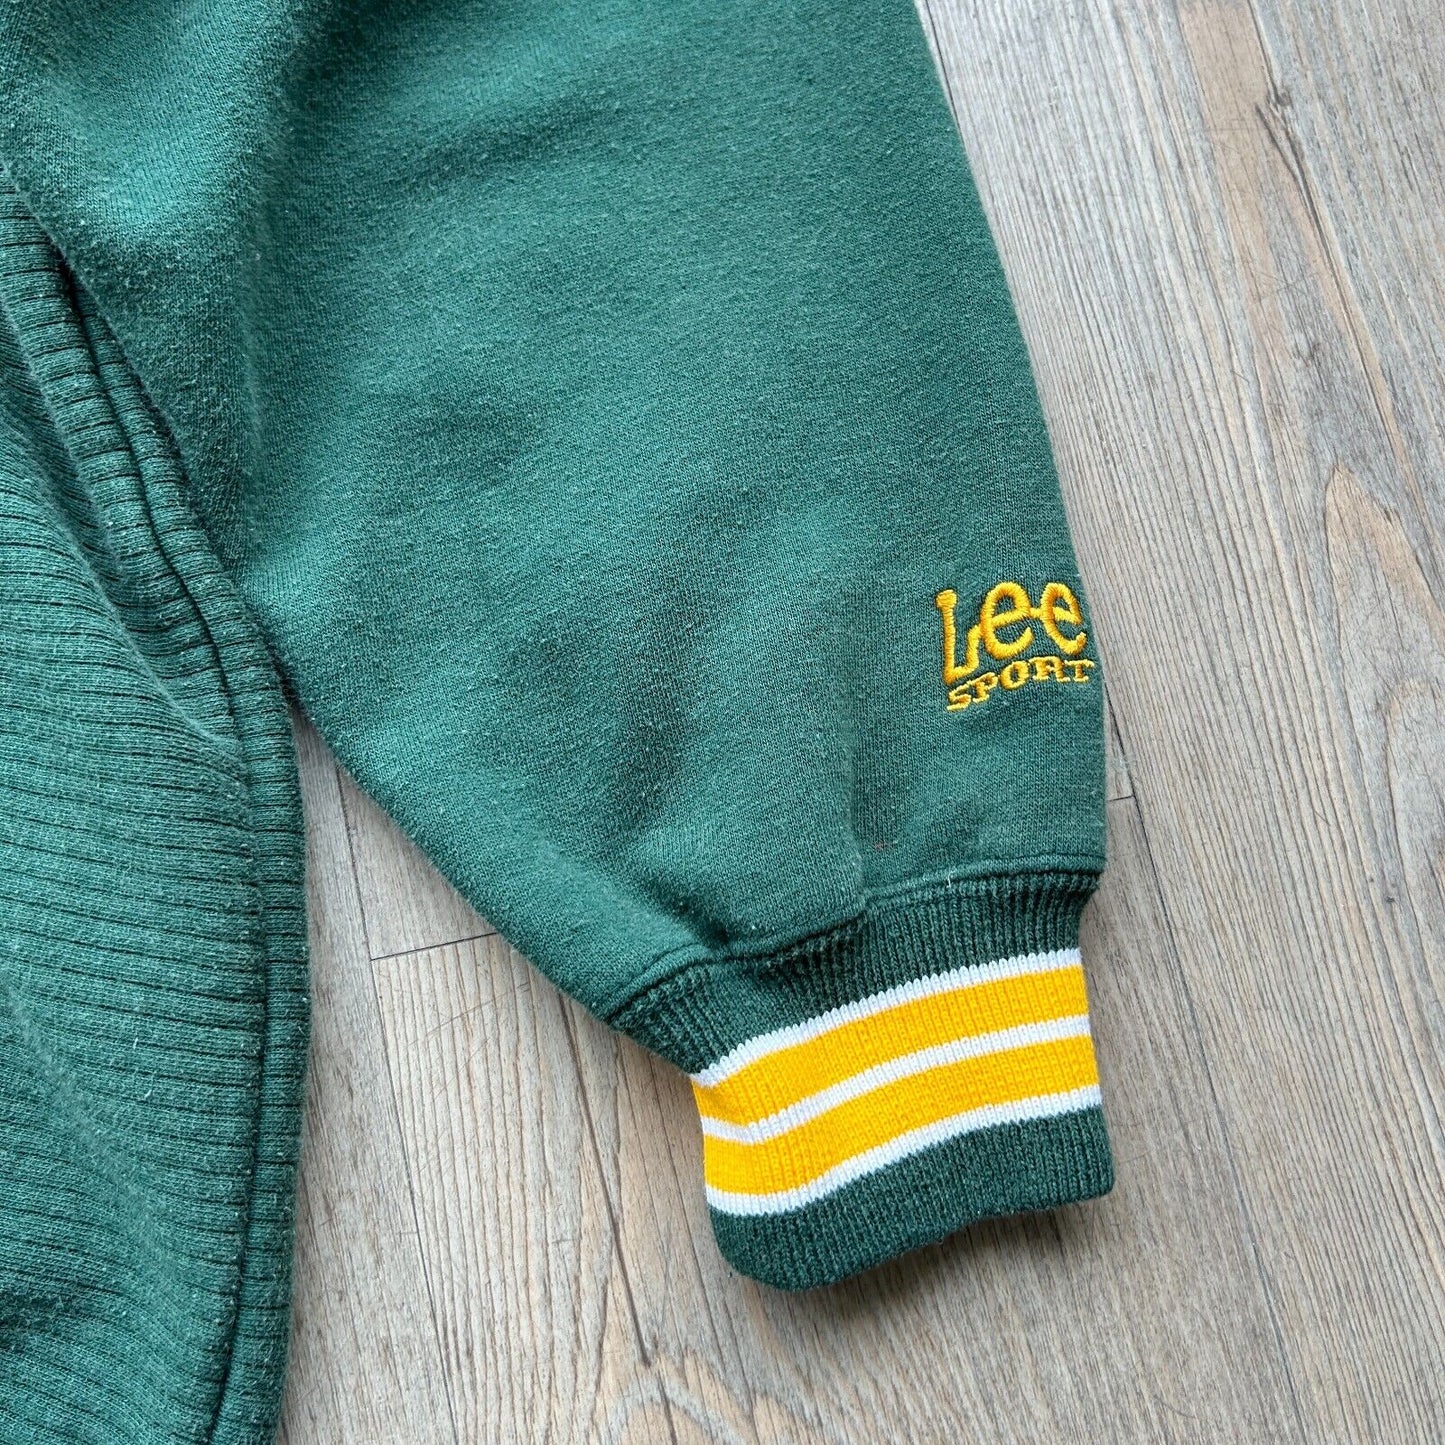 VINTAGE 90s | NFL Green Bay Packers Lee Sport Football Sweater sz L Adult